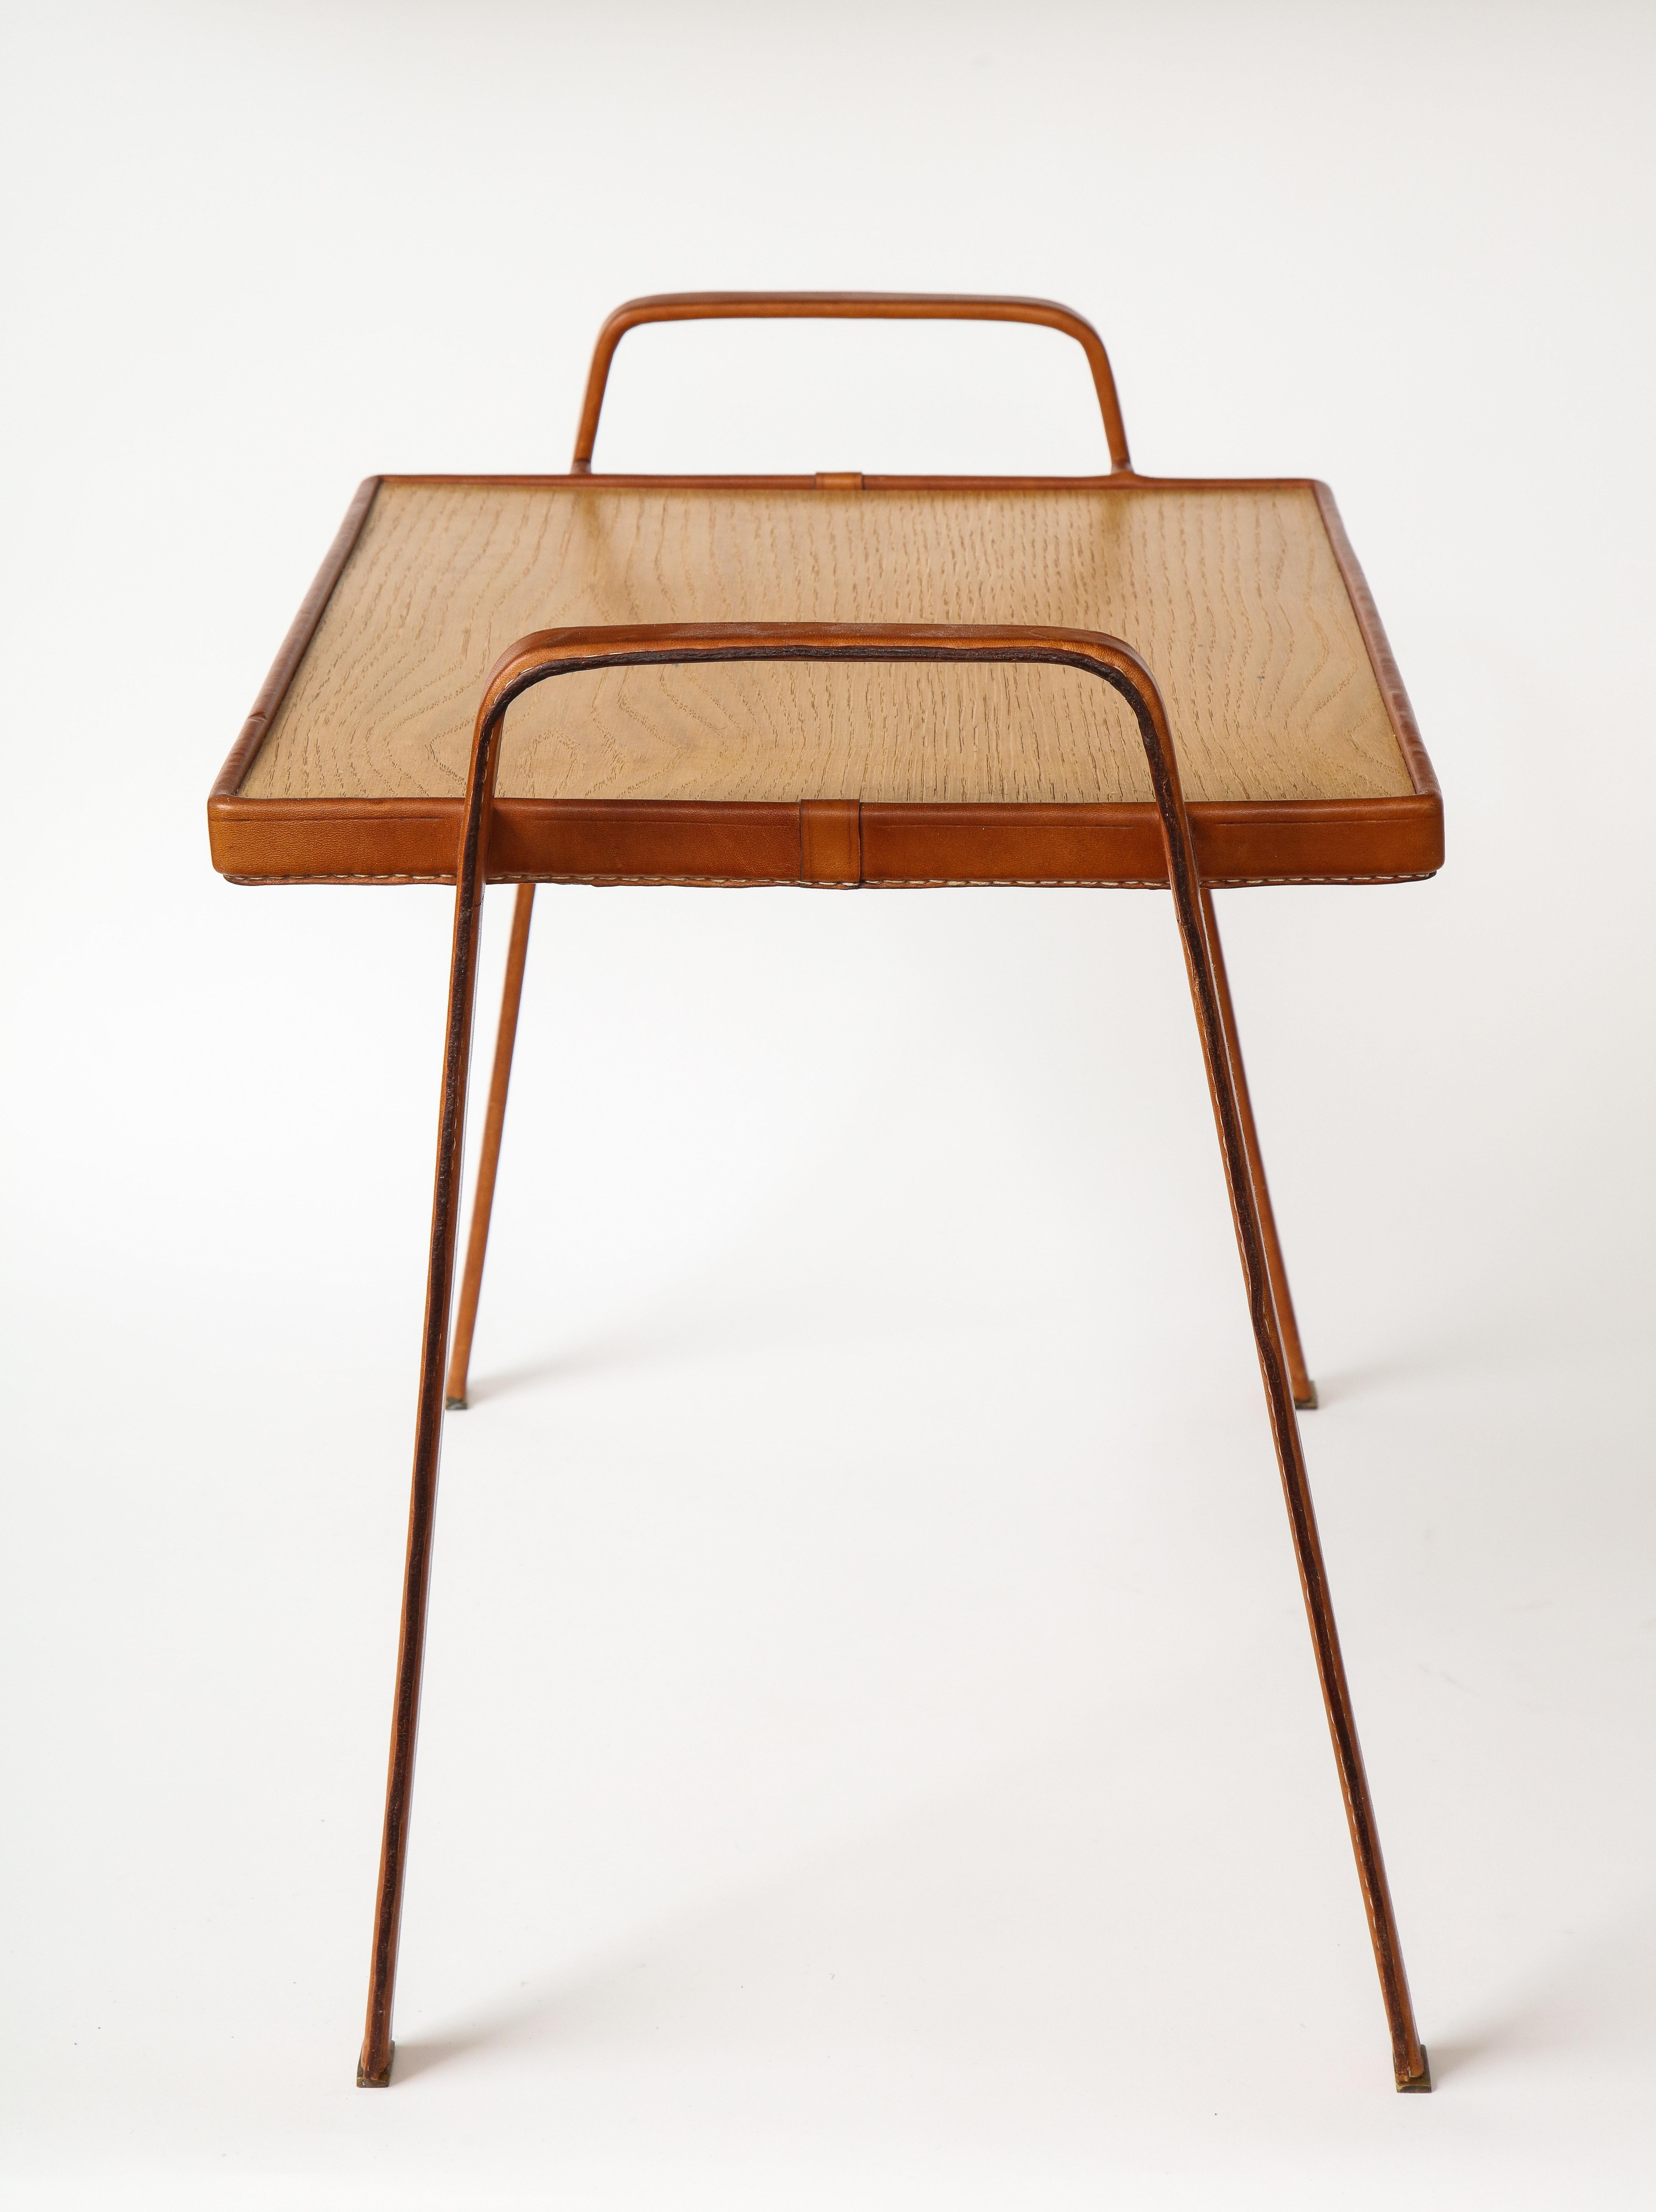 Leather Stitched Side Table by Jacques Adnet, c. 1950 In Excellent Condition For Sale In New York City, NY